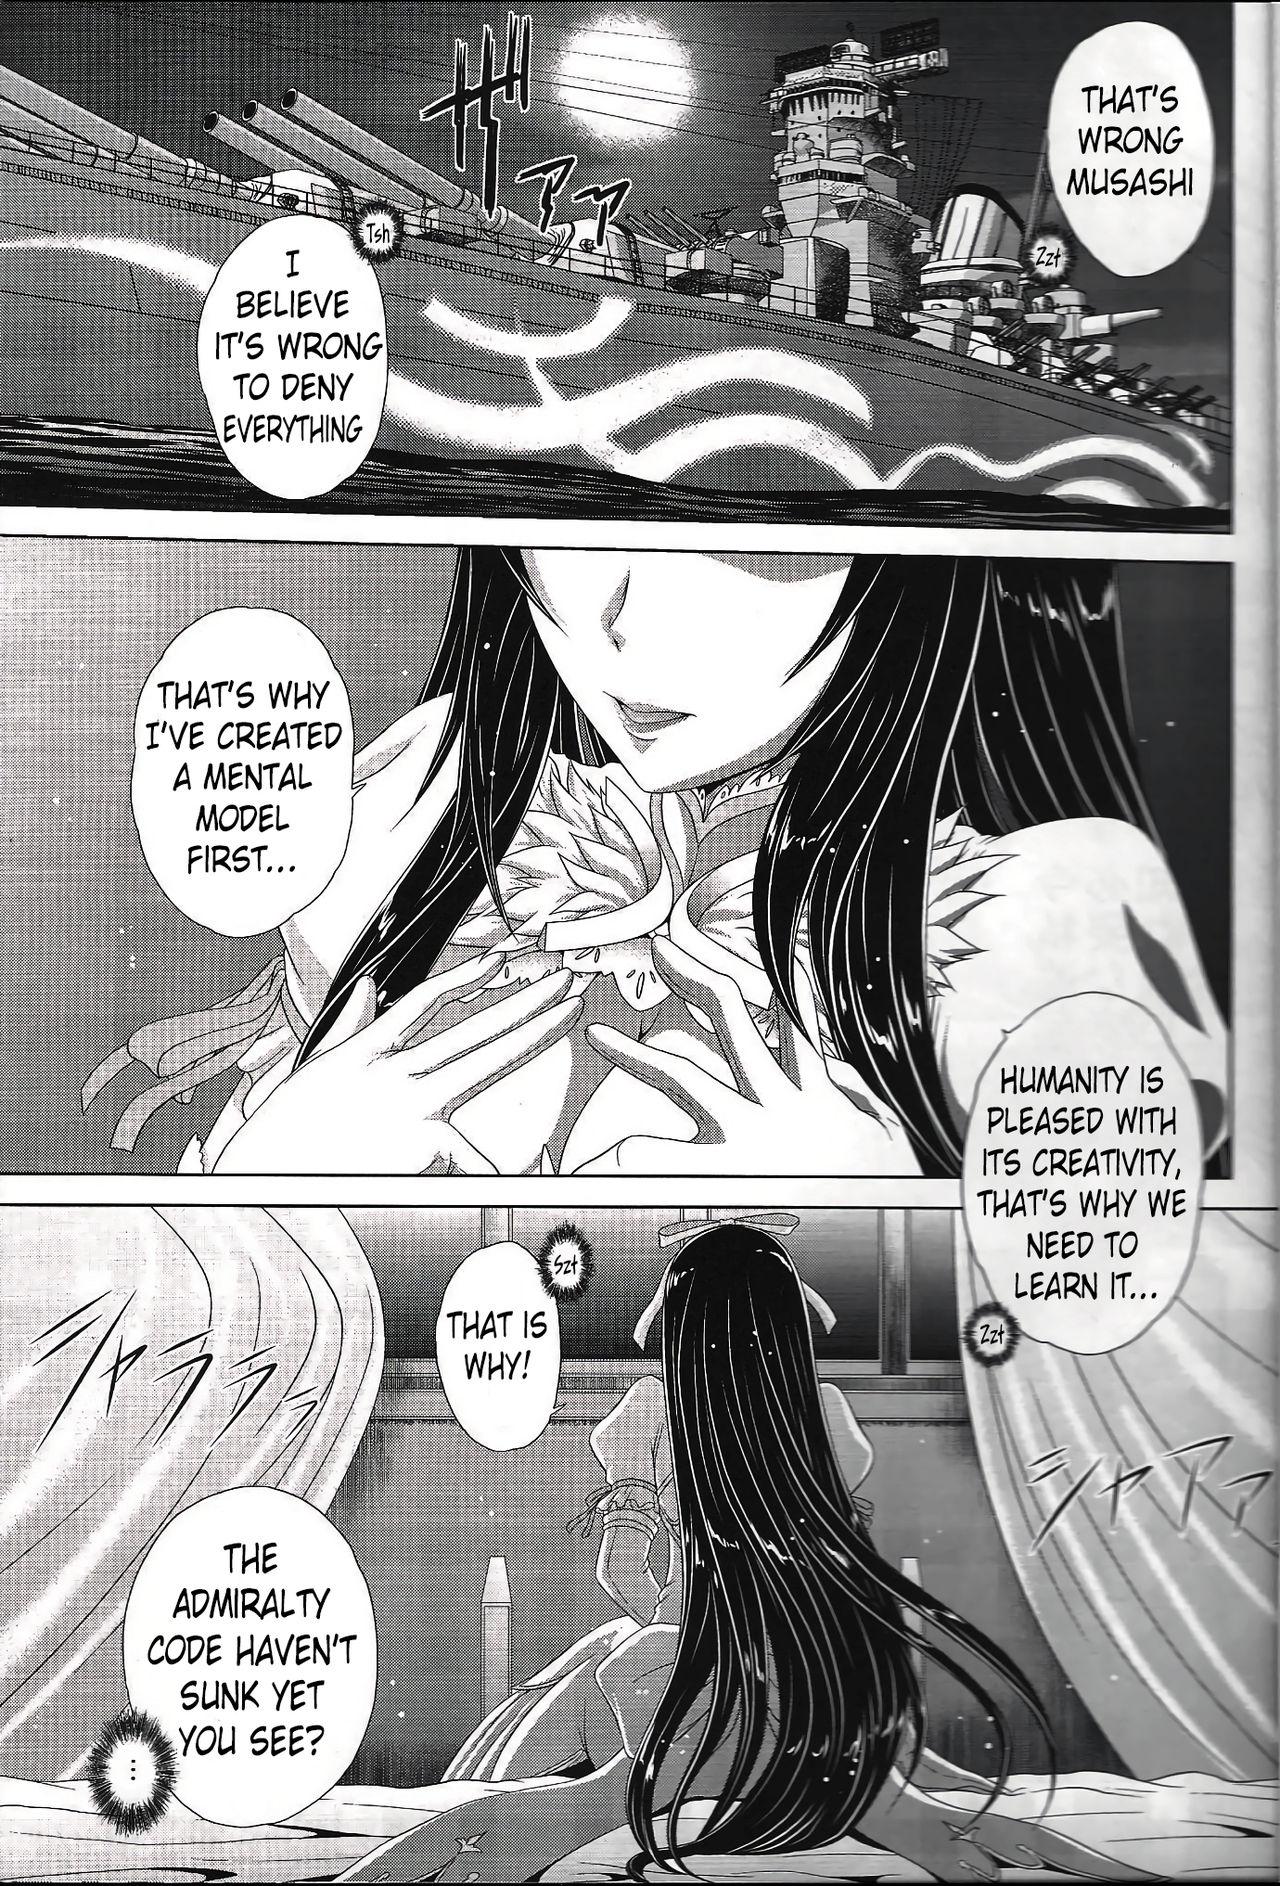 Hot Girl Pussy Sou Kikan Tsushin | Transmission from the Supreme Flagship - Arpeggio of blue steel Upskirt - Page 2